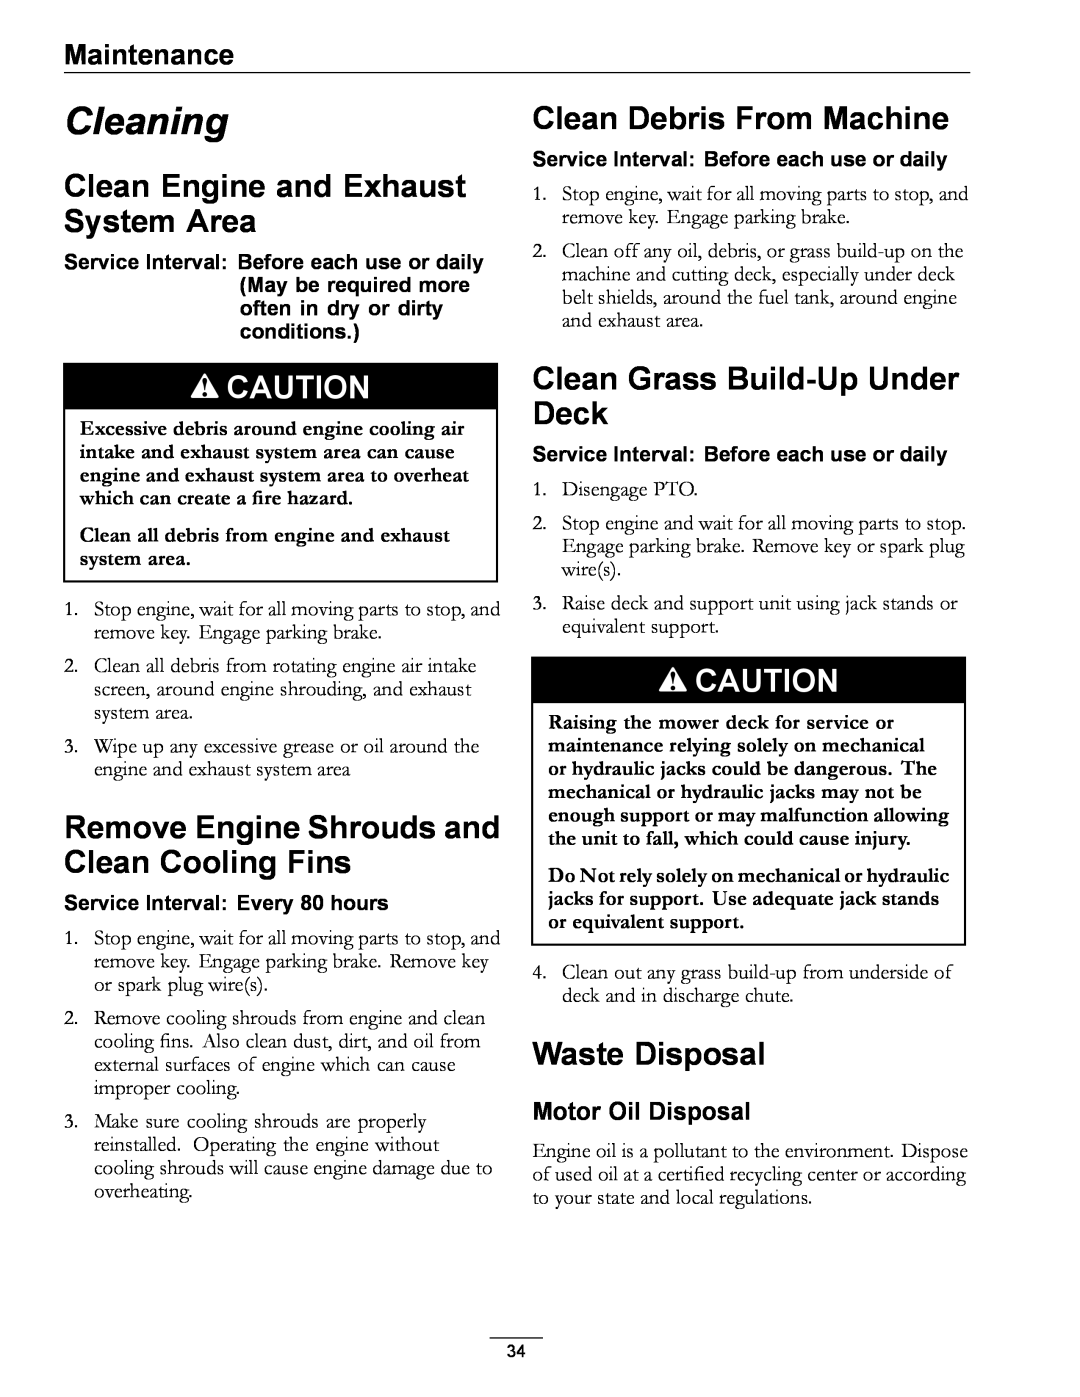 Exmark 4500-352 Cleaning, Clean Engine and Exhaust System Area, Clean Debris From Machine, Clean Grass Build-Up Under Deck 